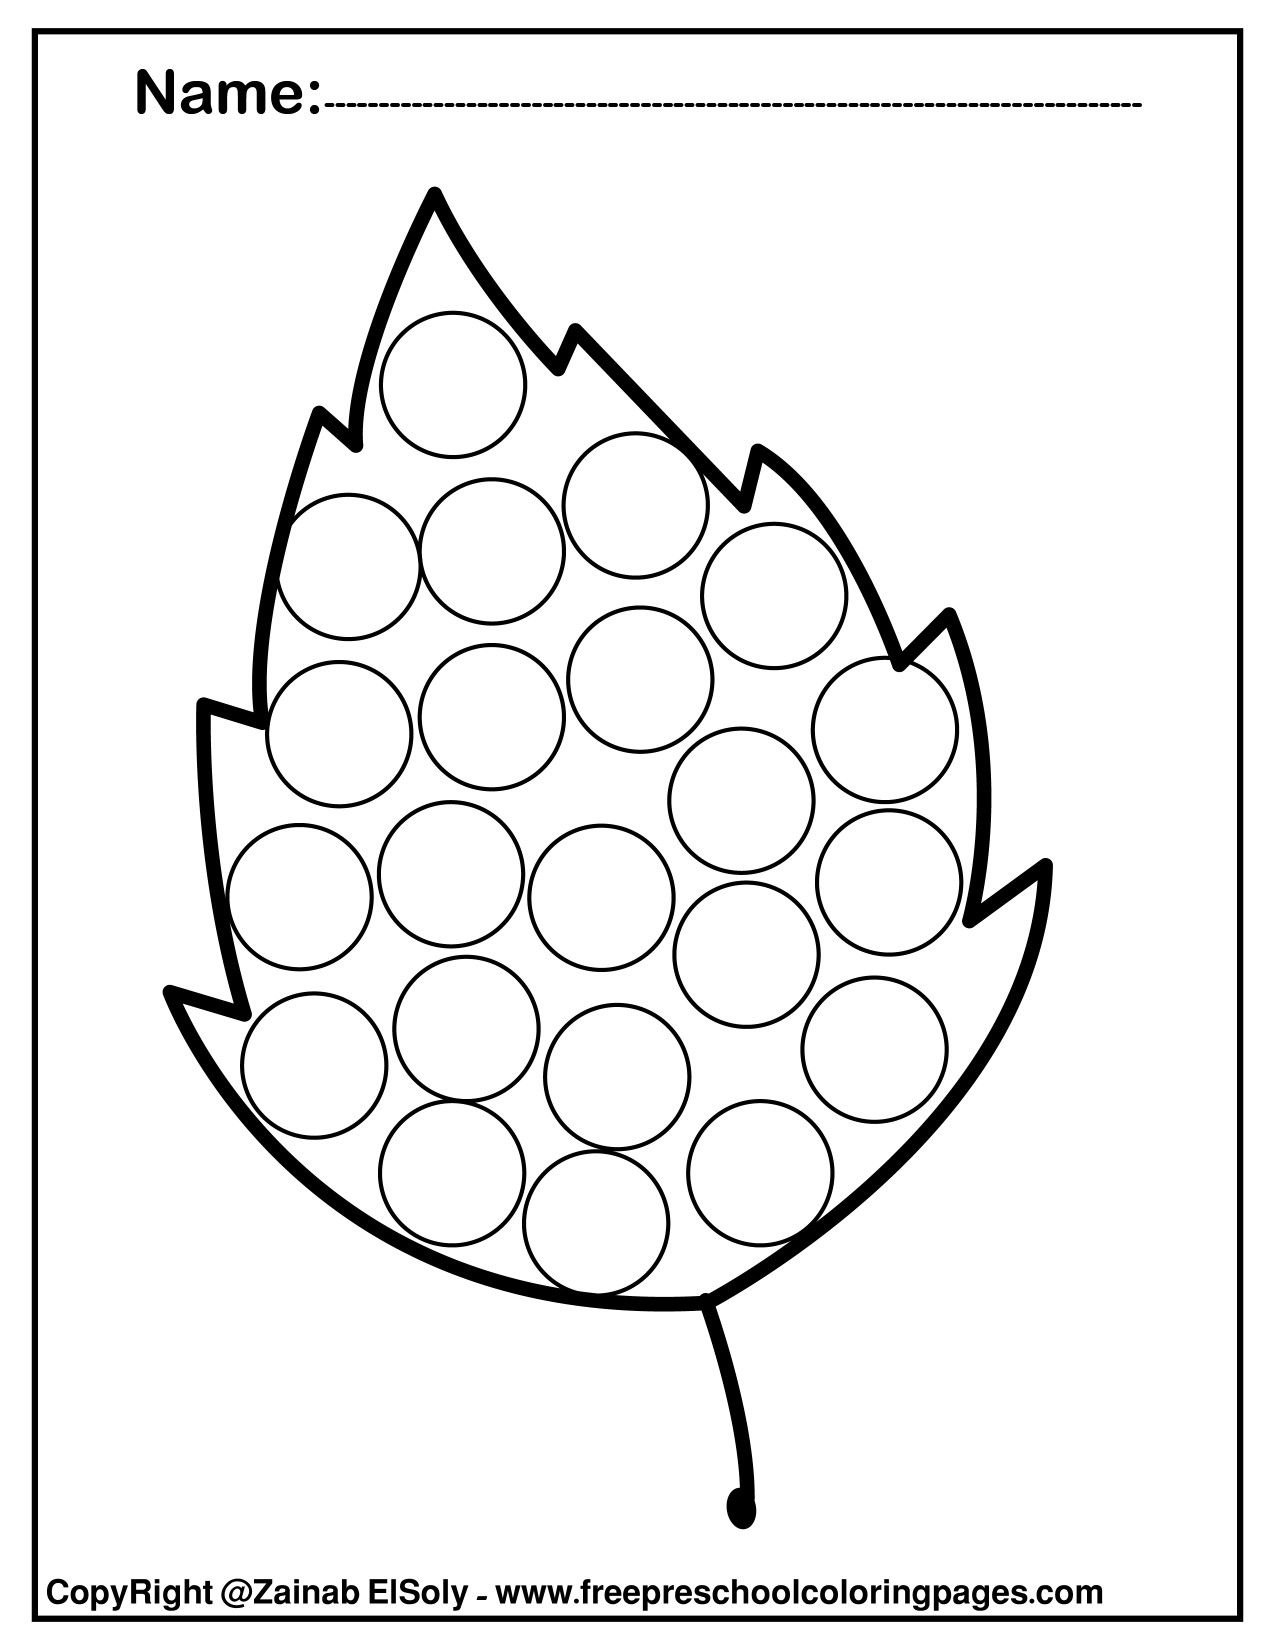 Free autumn leaves fall do a dot marker coloring pages free printable preschool coloring pages for toddler preschooâ dot markers dot marker activities do a dot